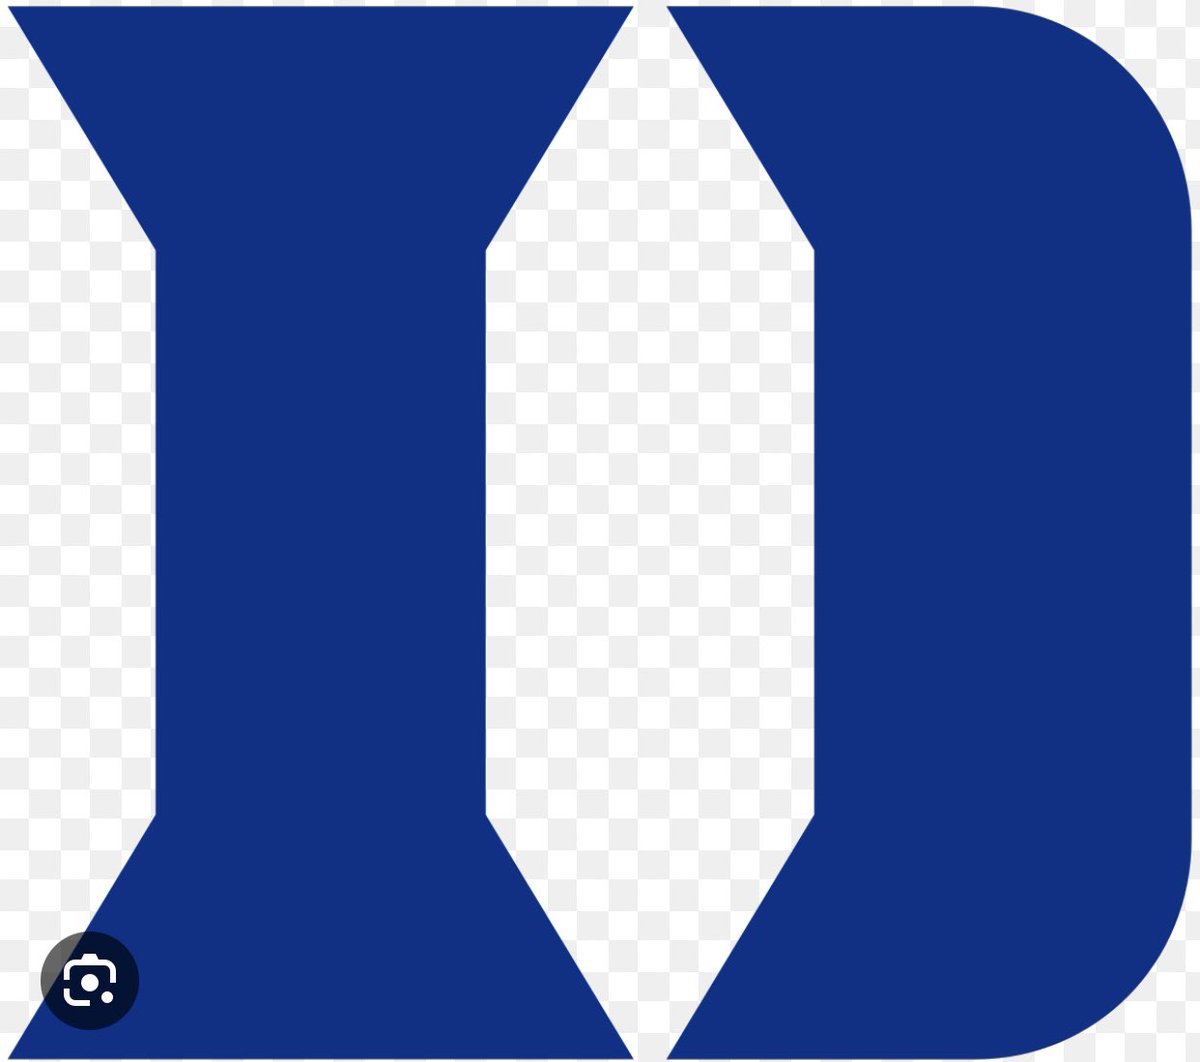 Blessed to receive an offer from Duke @DukeFOOTBALL @GinfanteMT @WF_Football @KRWallaceFB